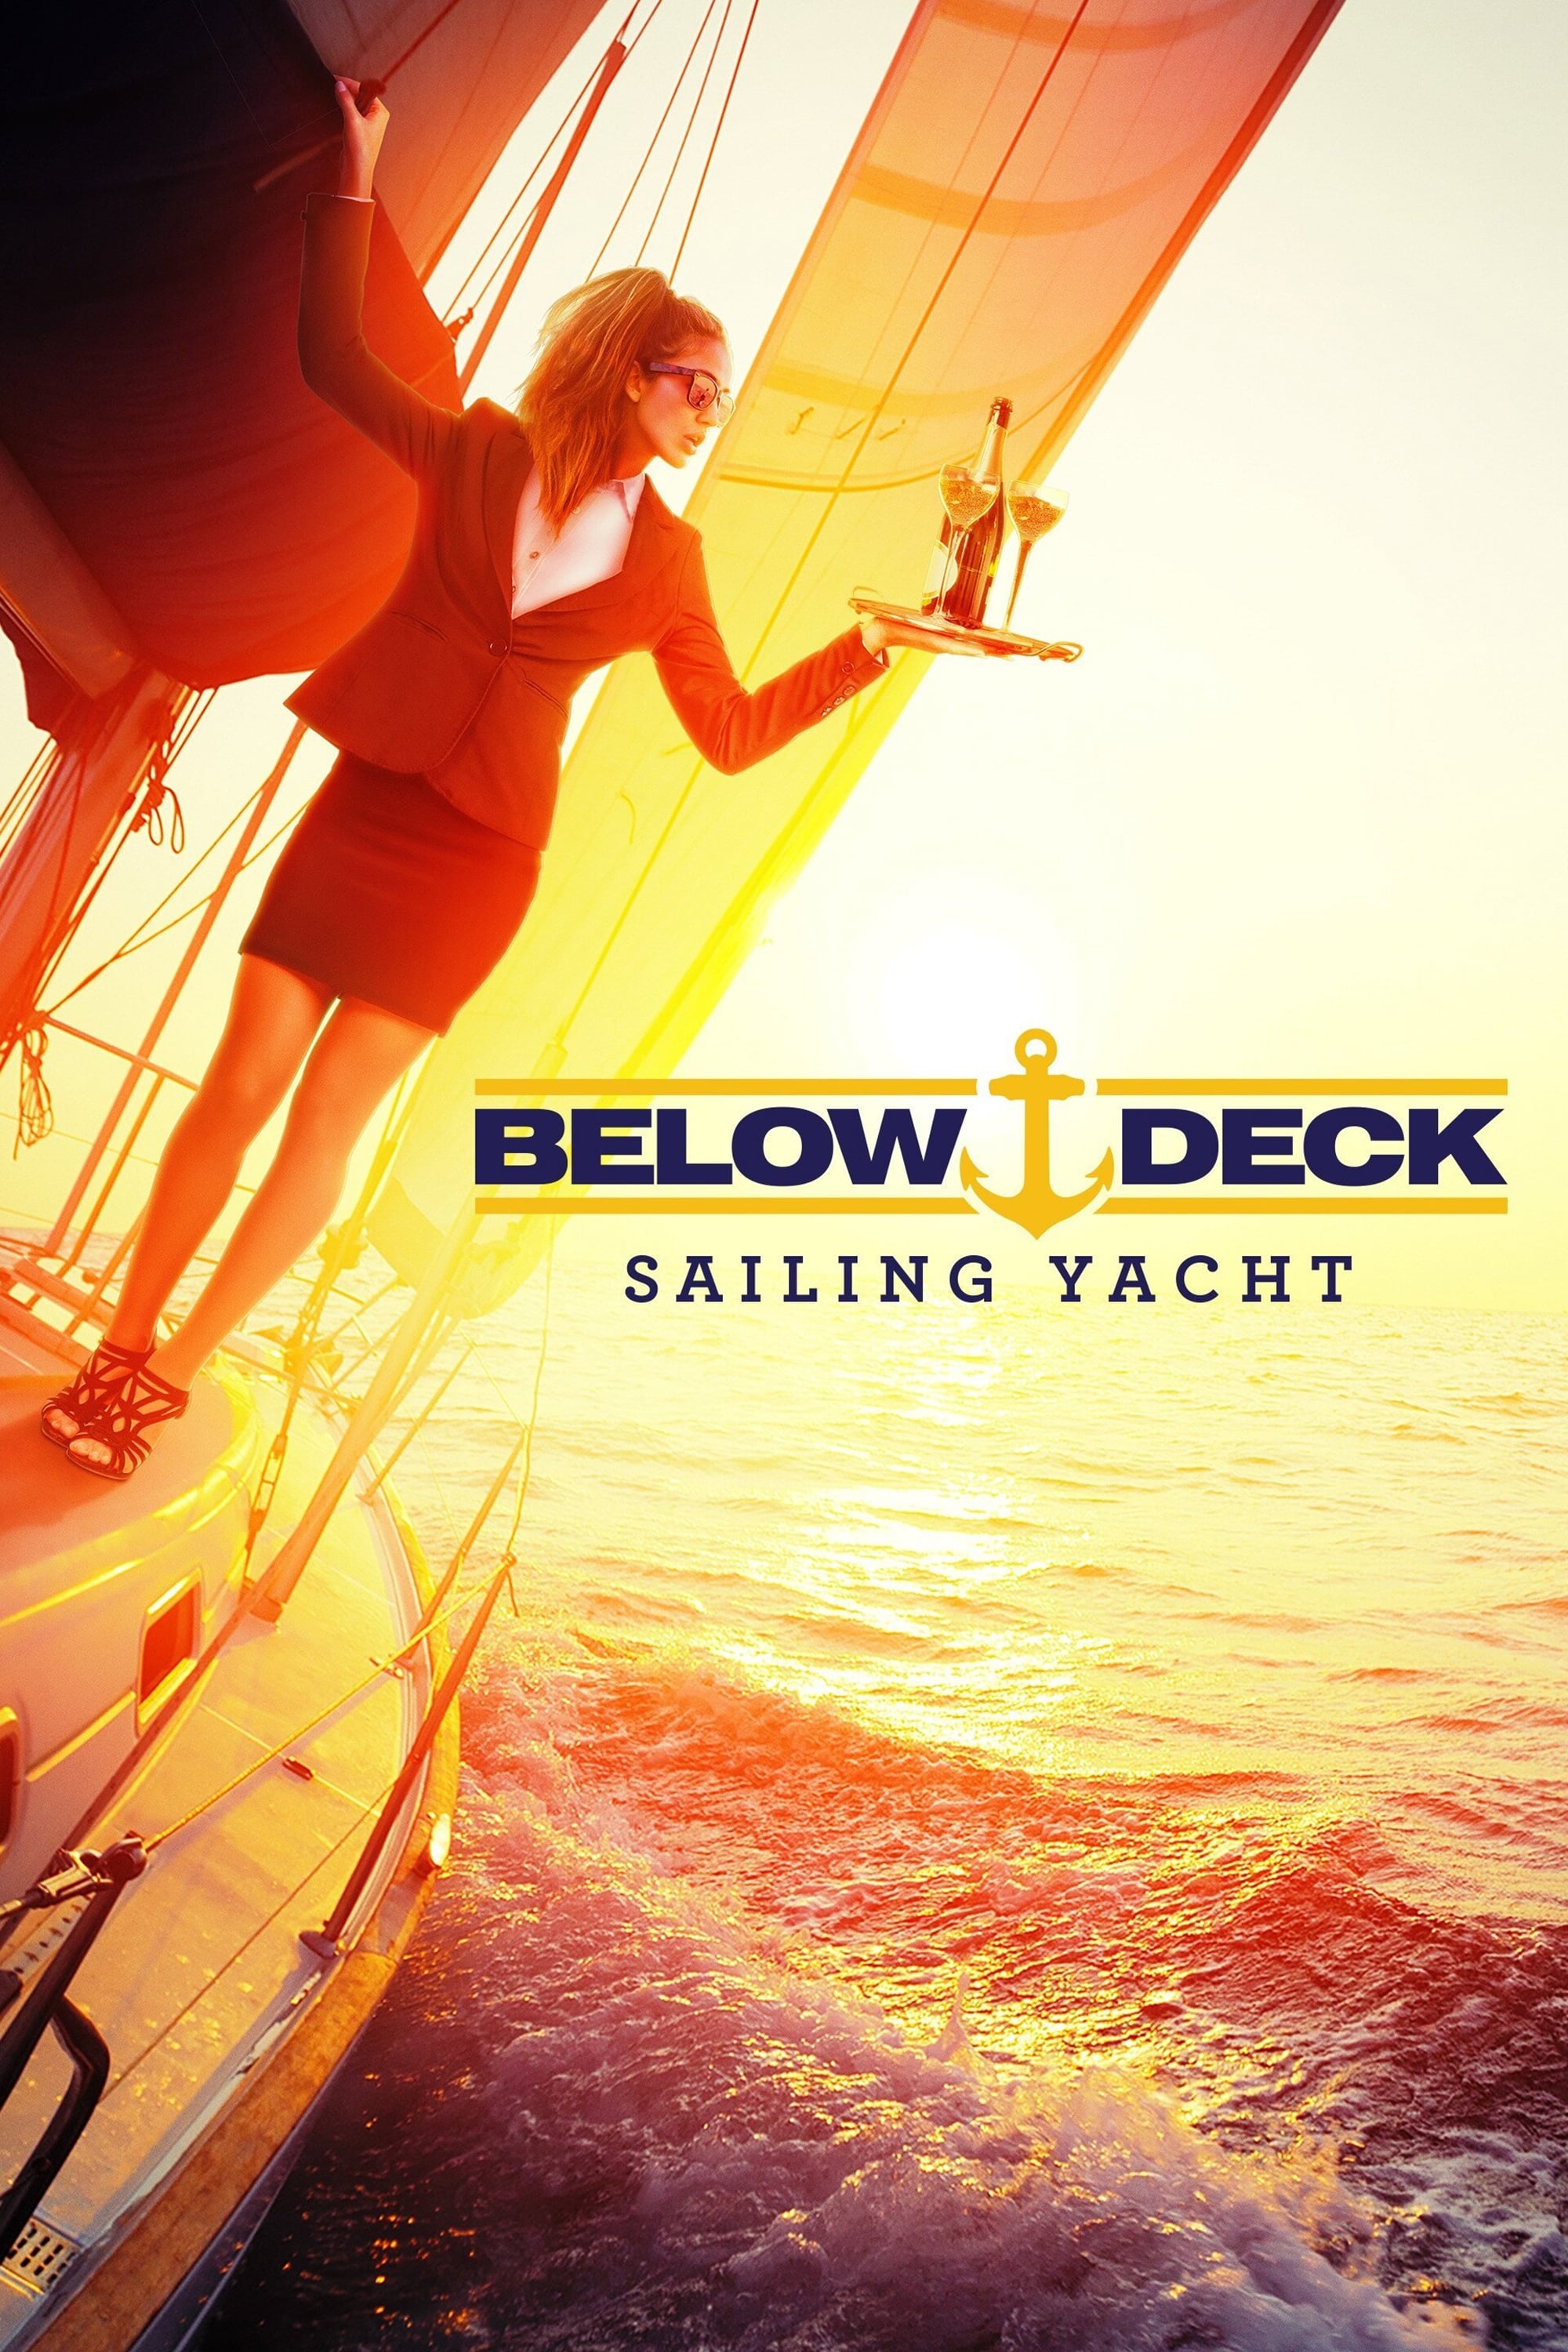 below deck sailing yacht where to watch